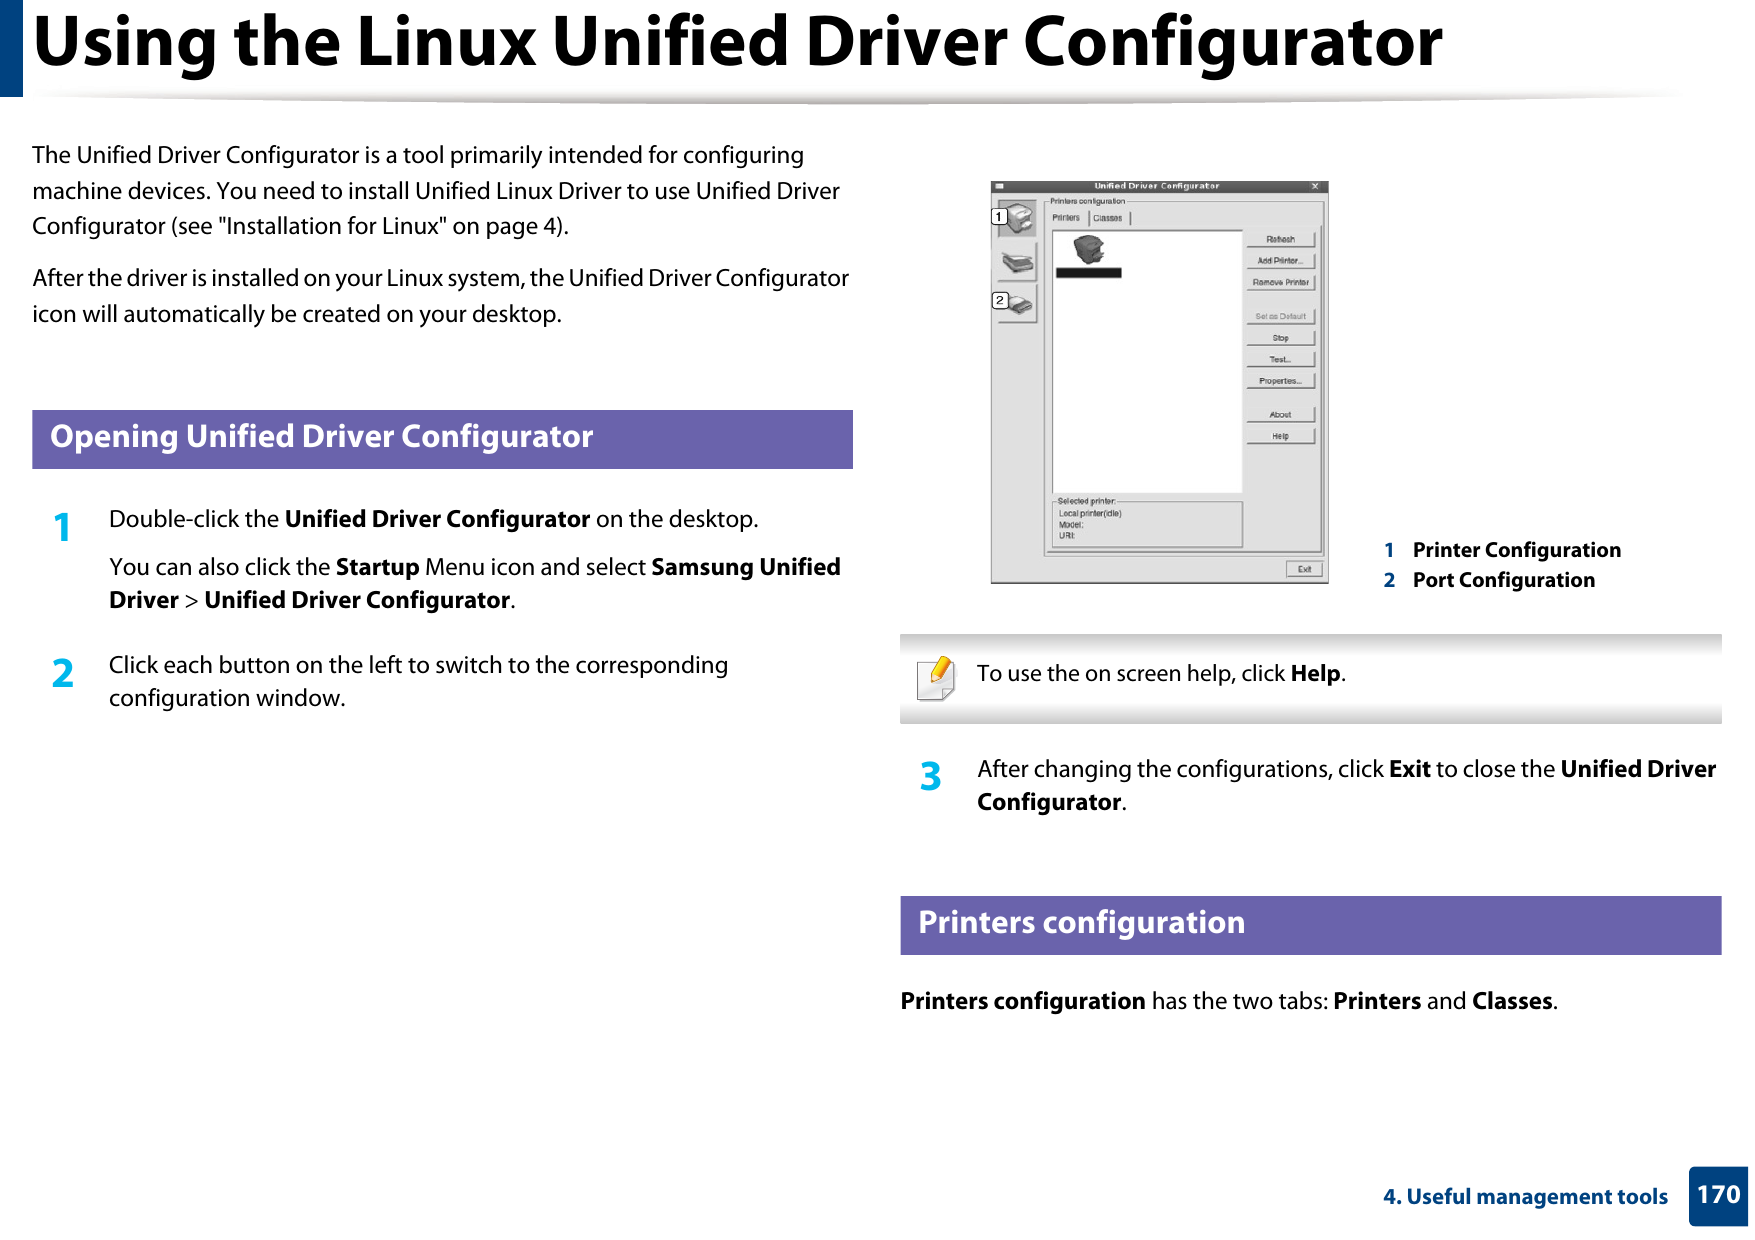 1704. Useful management toolsUsing the Linux Unified Driver ConfiguratorThe Unified Driver Configurator is a tool primarily intended for configuring machine devices. You need to install Unified Linux Driver to use Unified Driver Configurator (see &quot;Installation for Linux&quot; on page 4).After the driver is installed on your Linux system, the Unified Driver Configurator icon will automatically be created on your desktop.10 Opening Unified Driver Configurator1Double-click the Unified Driver Configurator on the desktop.You can also click the Startup Menu icon and select Samsung Unified Driver &gt; Unified Driver Configurator.2  Click each button on the left to switch to the corresponding configuration window. To use the on screen help, click Help. 3  After changing the configurations, click Exit to close the Unified Driver Configurator.11 Printers configurationPrinters configuration has the two tabs: Printers and Classes.1Printer Configuration 2Port Configuration 